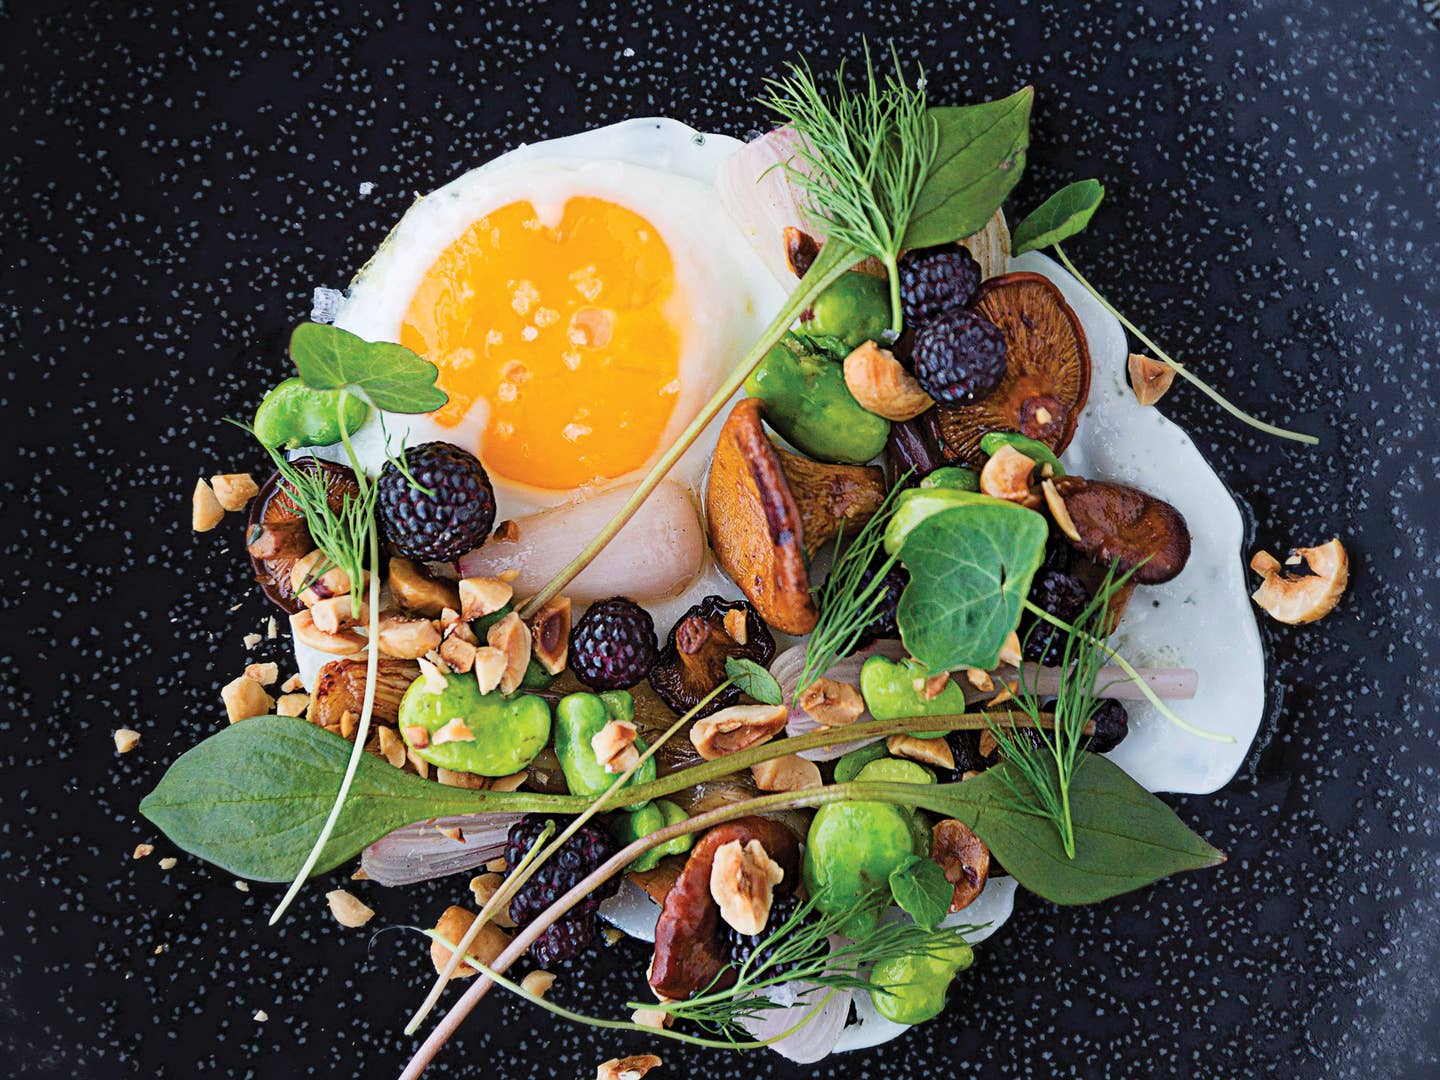 Minneapolis, Fried Egg with Hazelnuts, Chanterelles, Green Garlic and Blackberries